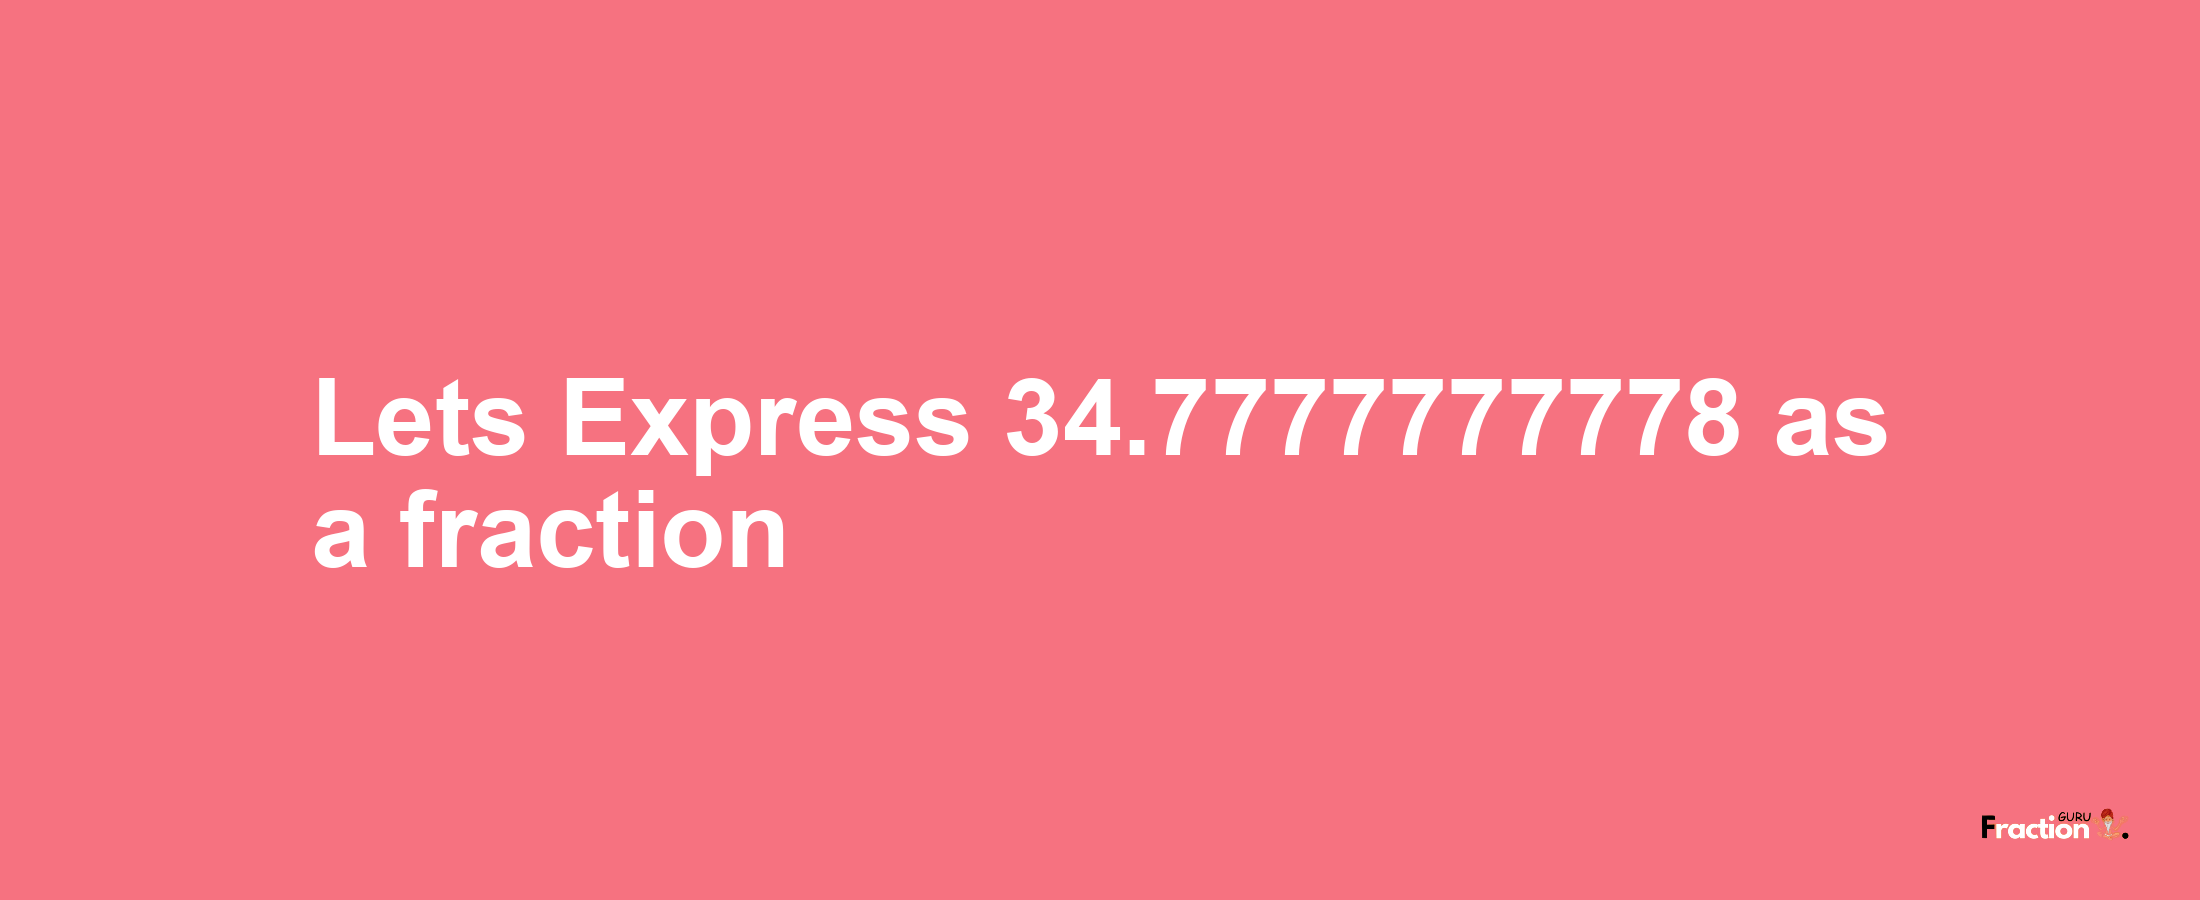 Lets Express 34.7777777778 as afraction